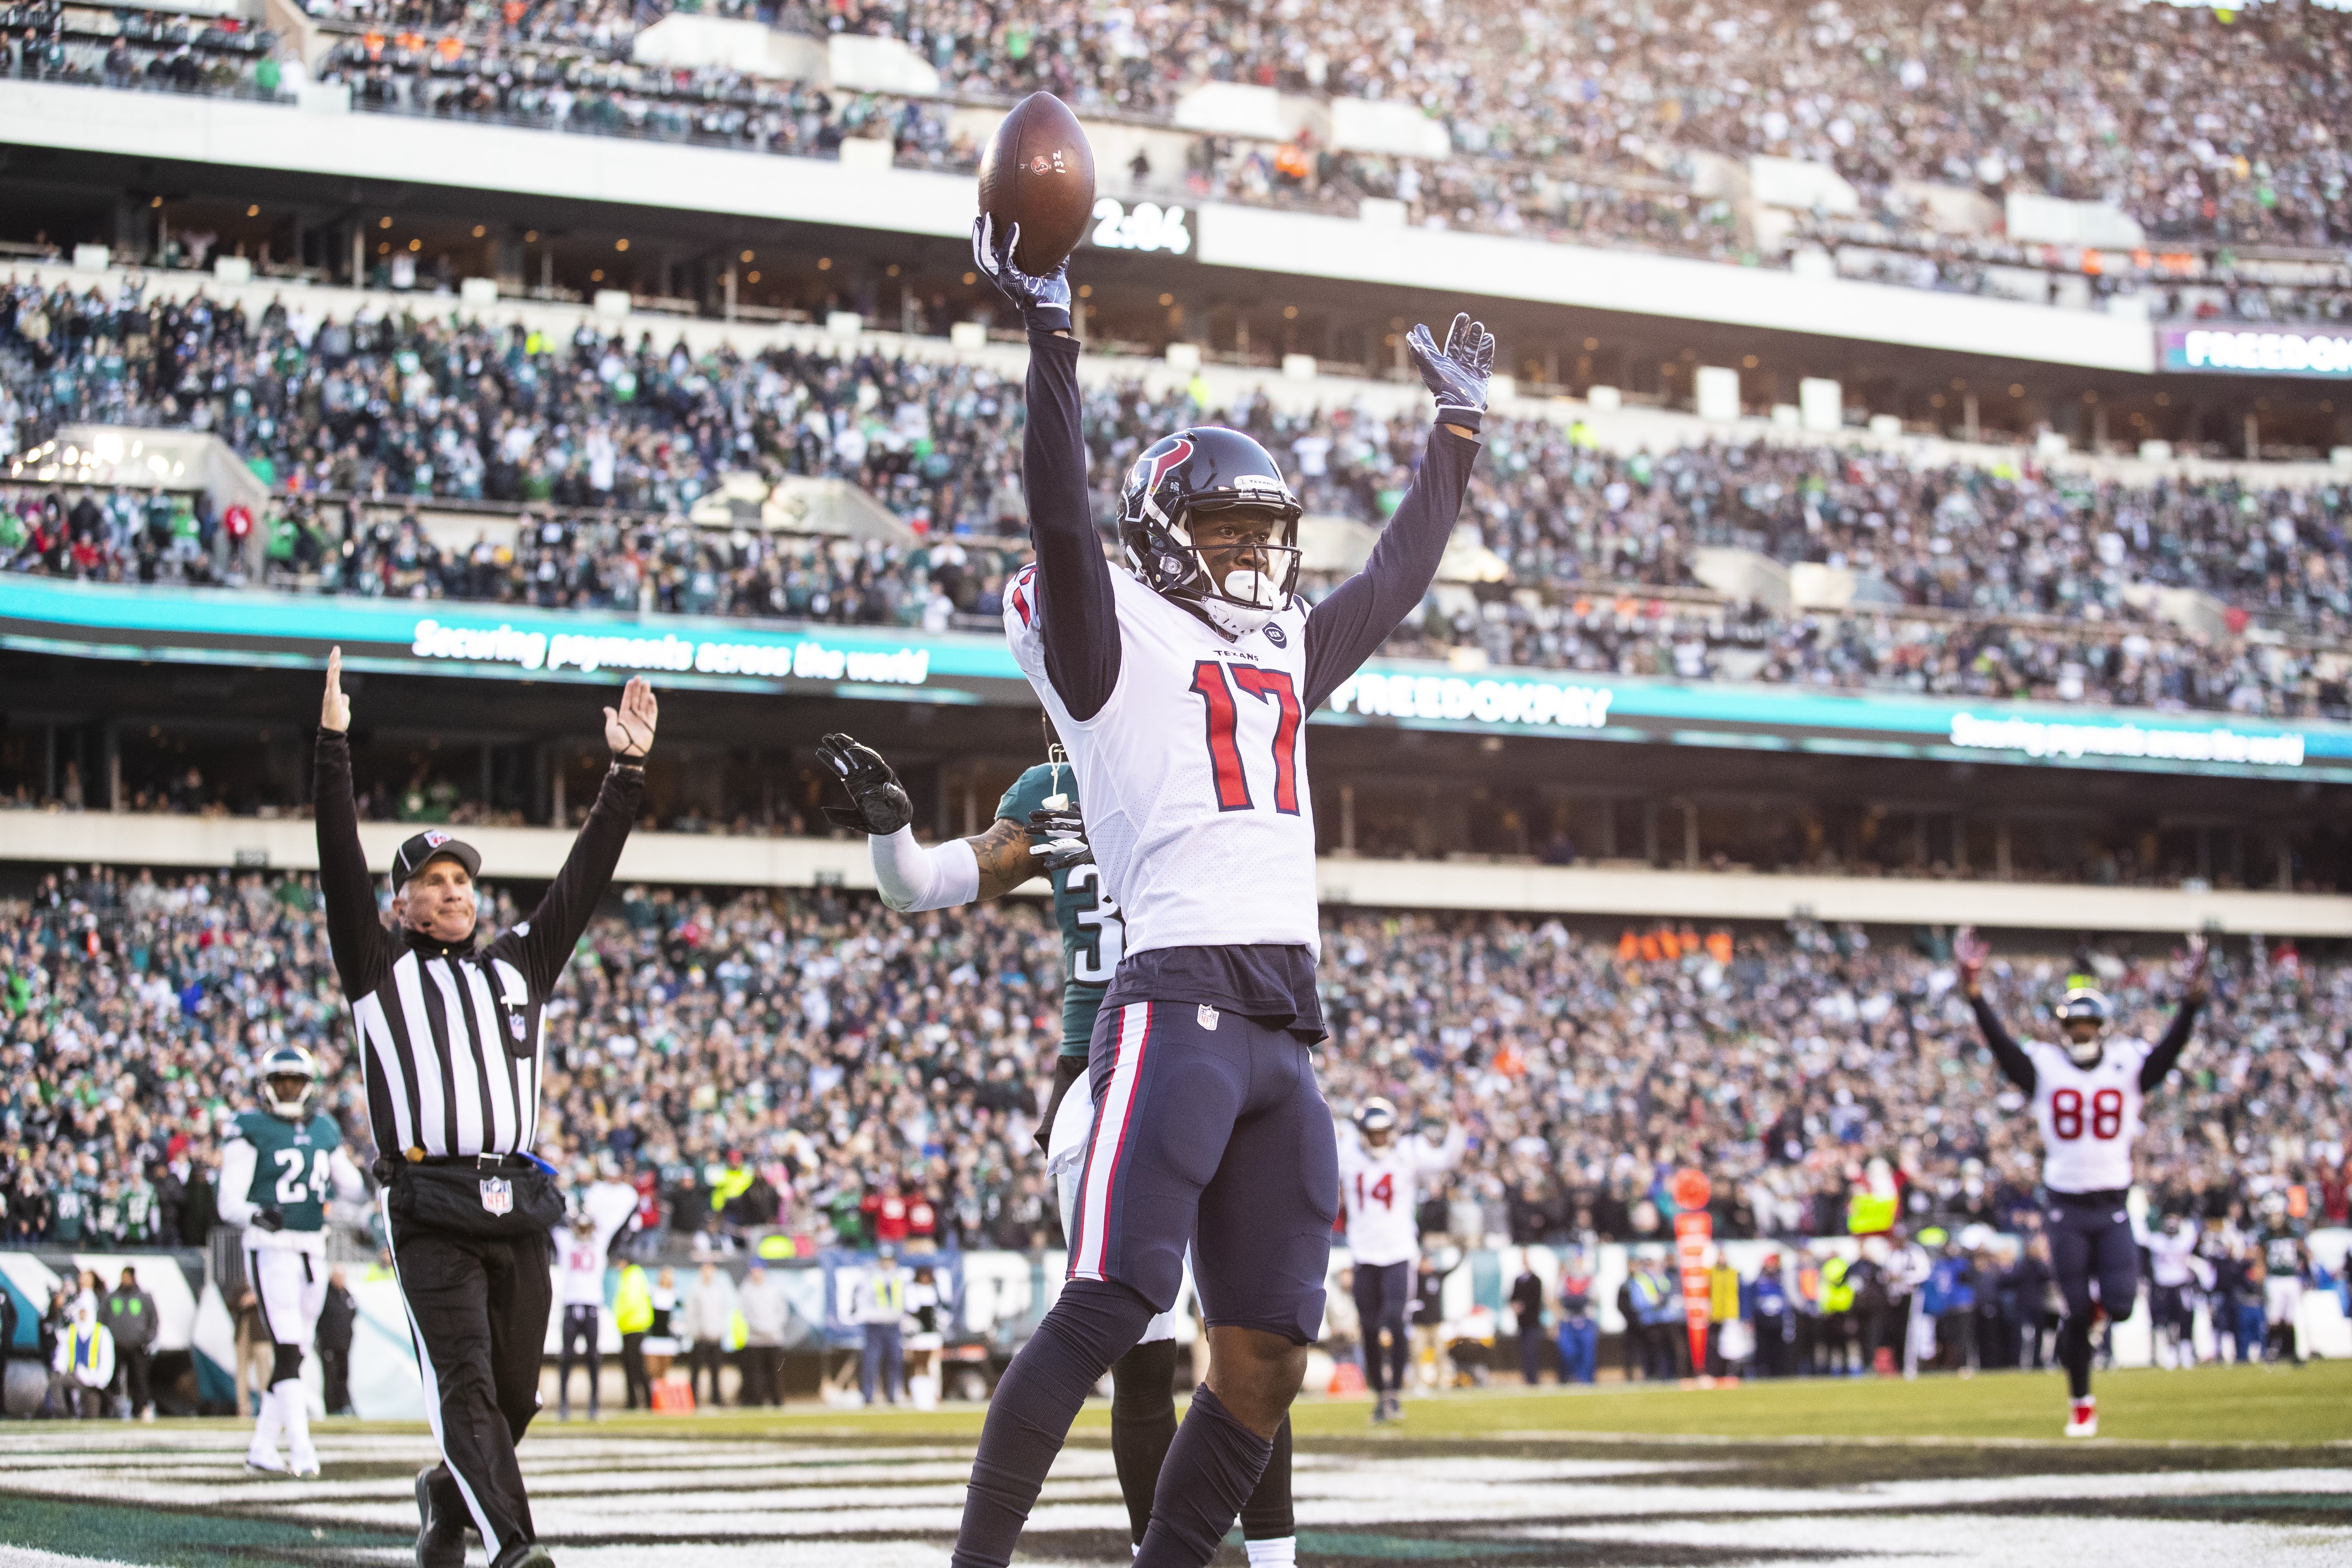  Vyncint Smith of the Houston Texans celebrates a touchdown against the Eagles